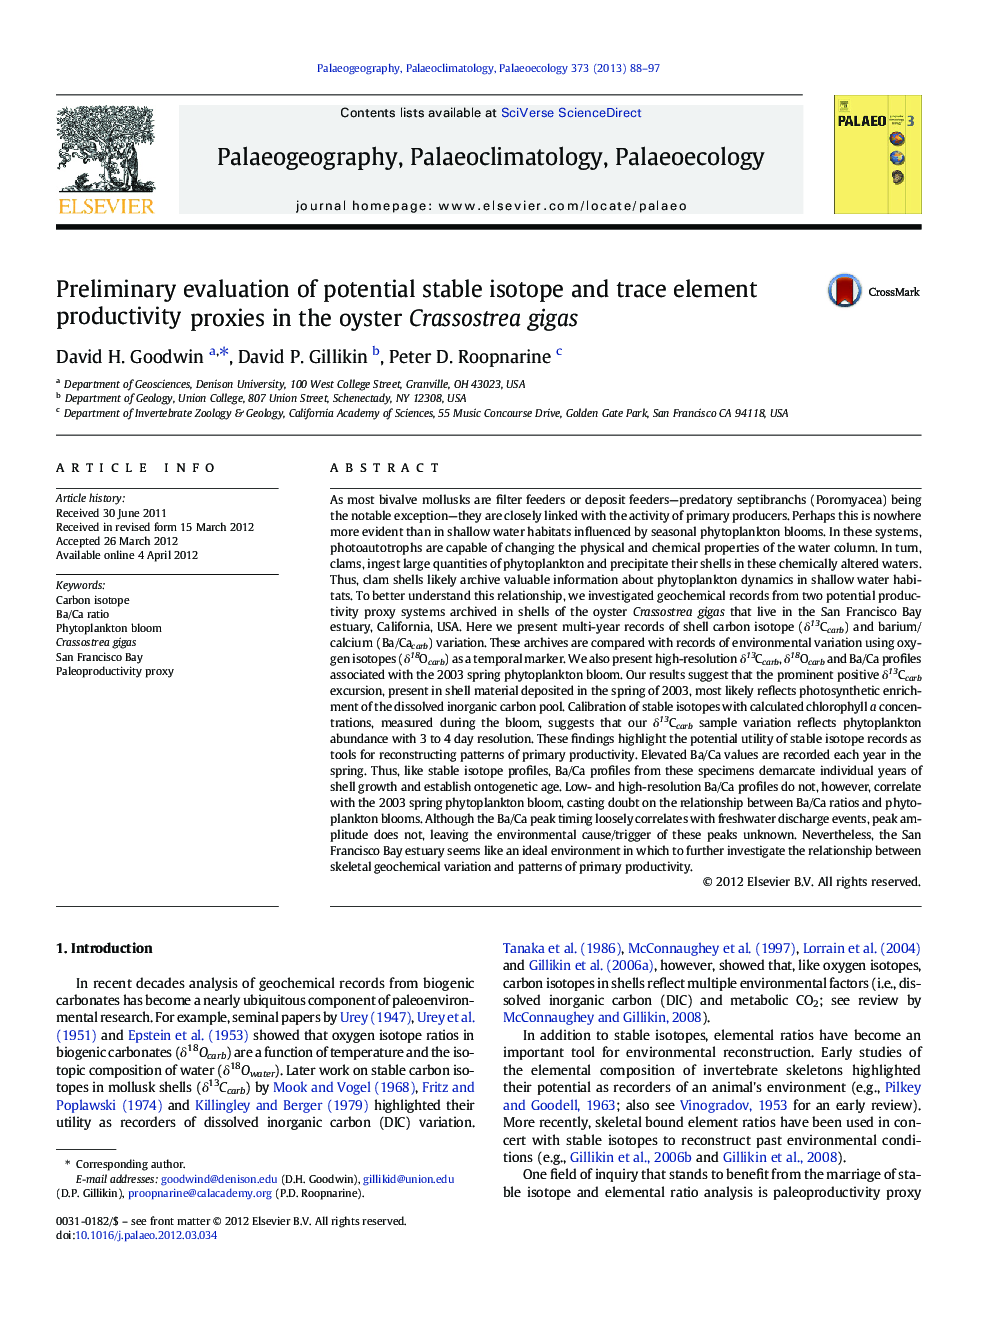 Preliminary evaluation of potential stable isotope and trace element productivity proxies in the oyster Crassostrea gigas